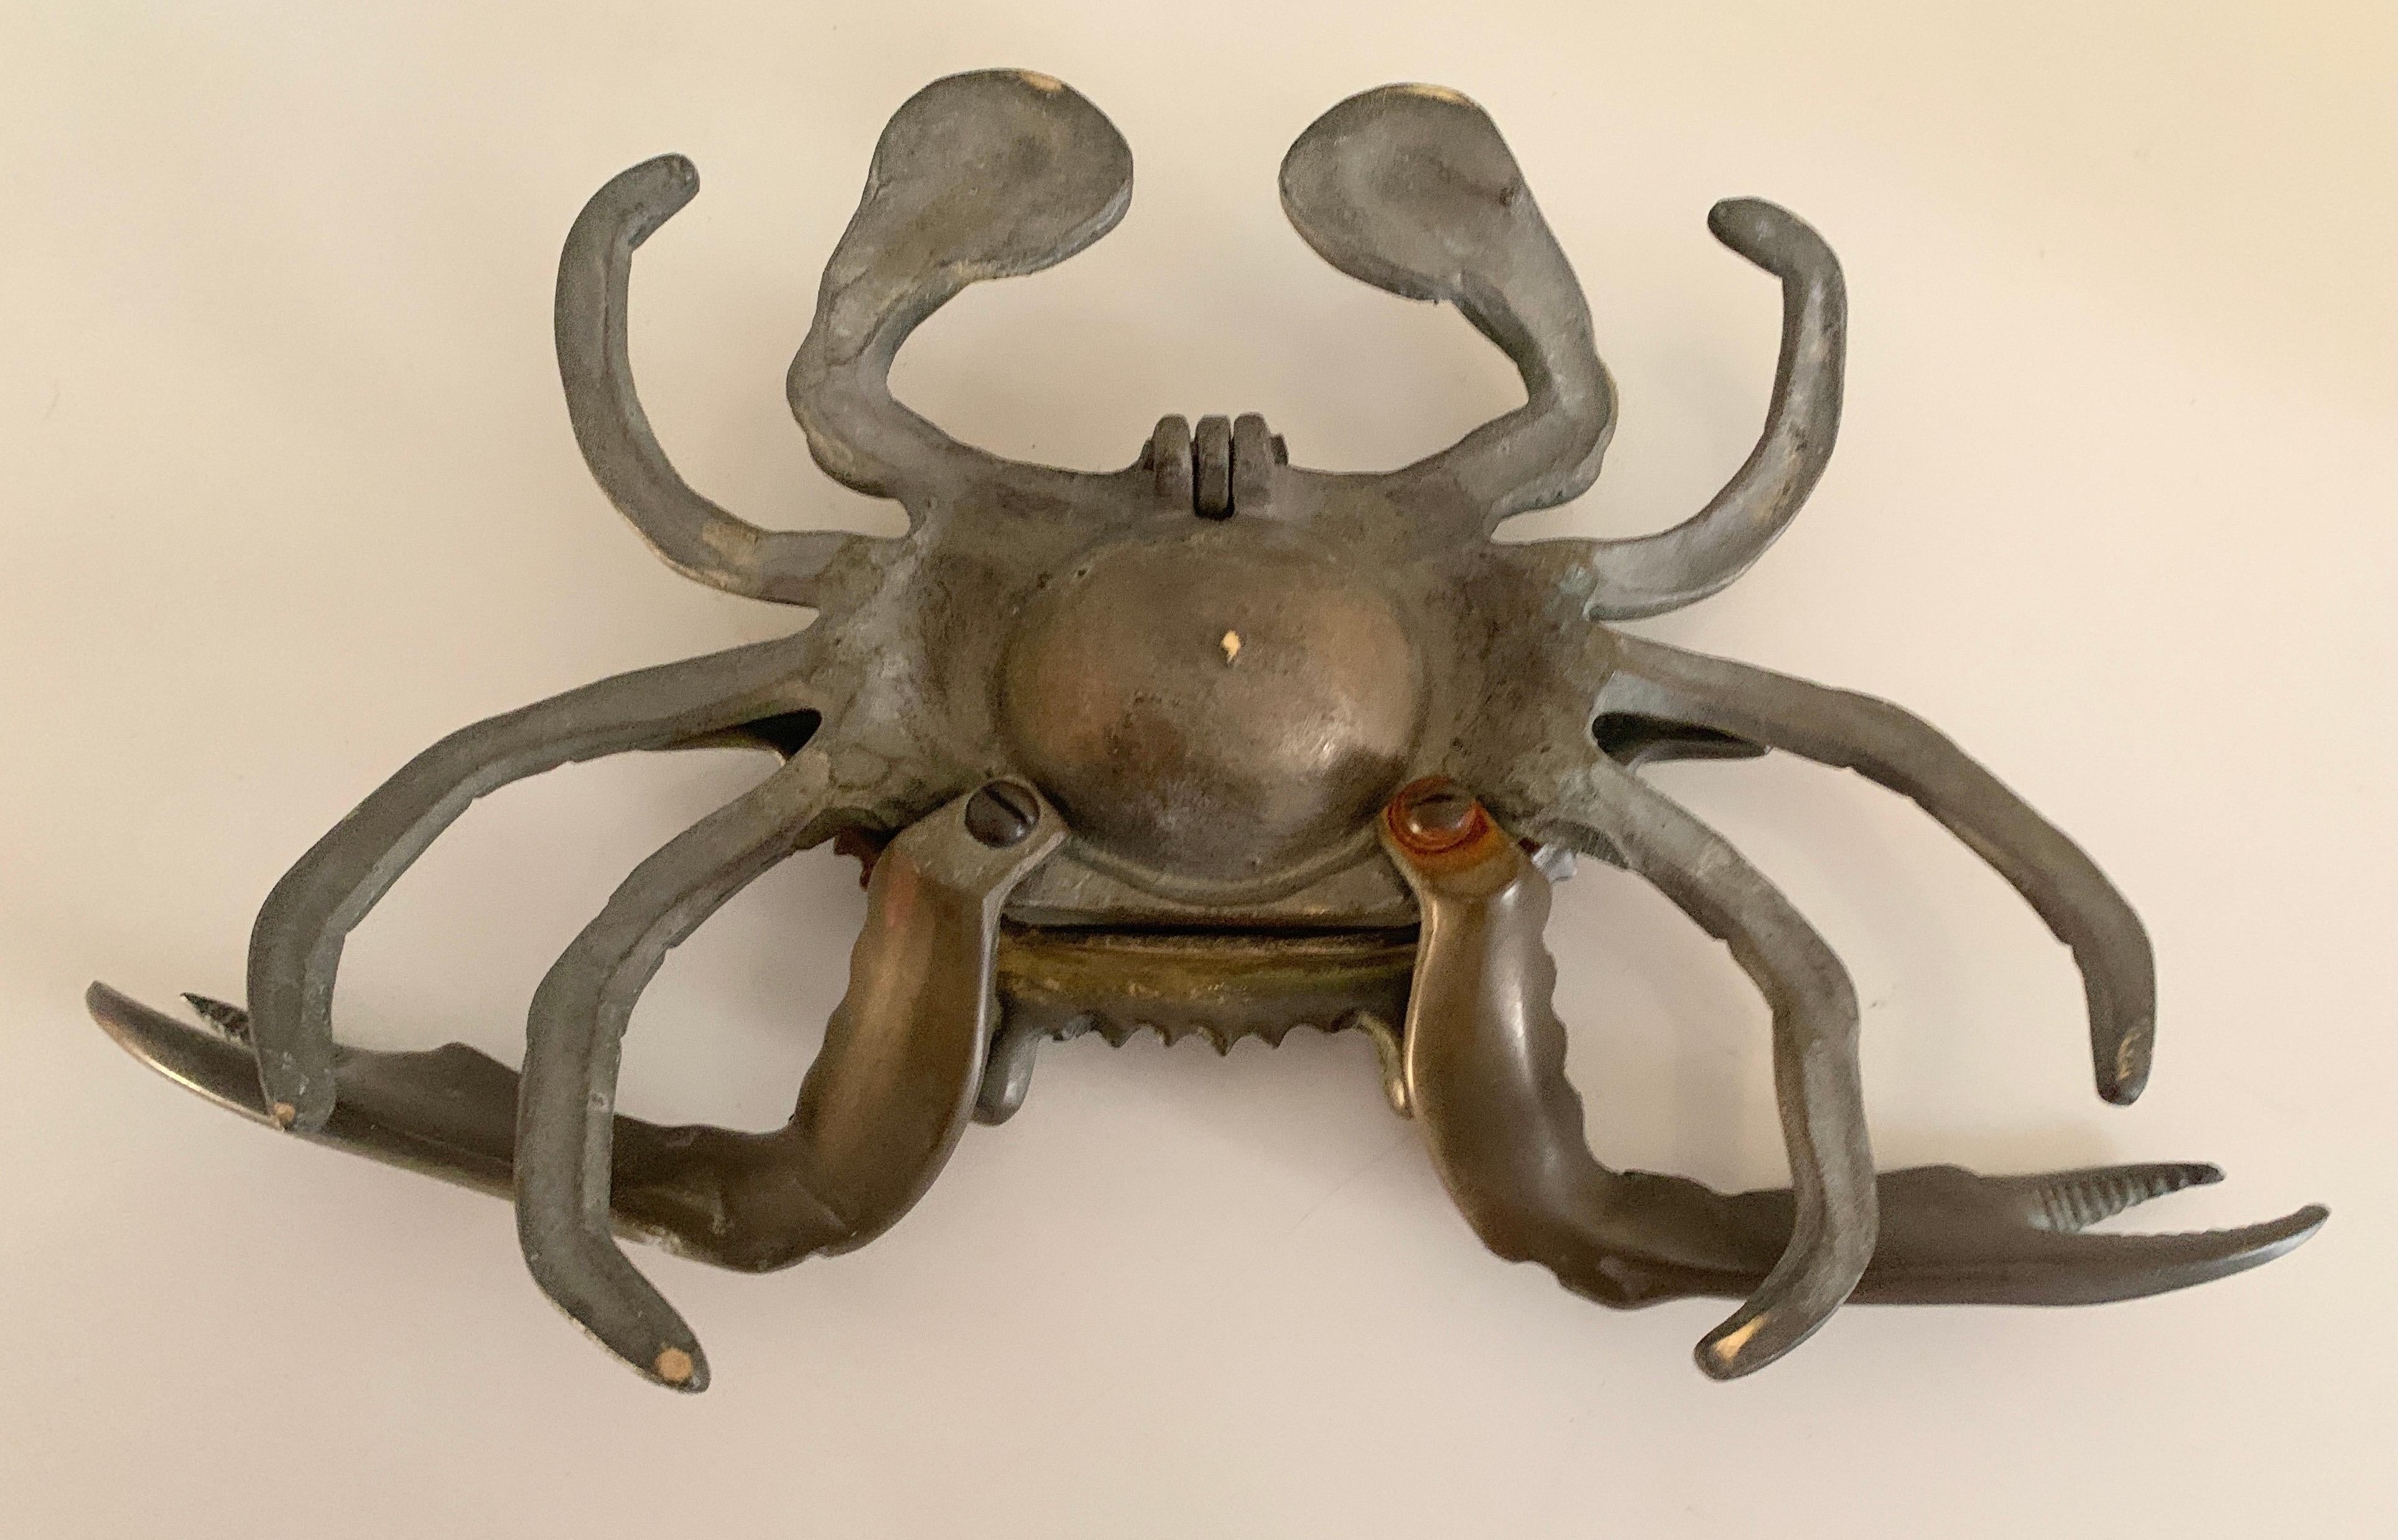 A large and heavy solid Bronze Ashtray in the shape of a Crab. This piece is a compliment as a decorative piece and also has a hinged top to be used as an ashtray for your perfect smoke or 420. 

A great gift for the Cancer in our life or the